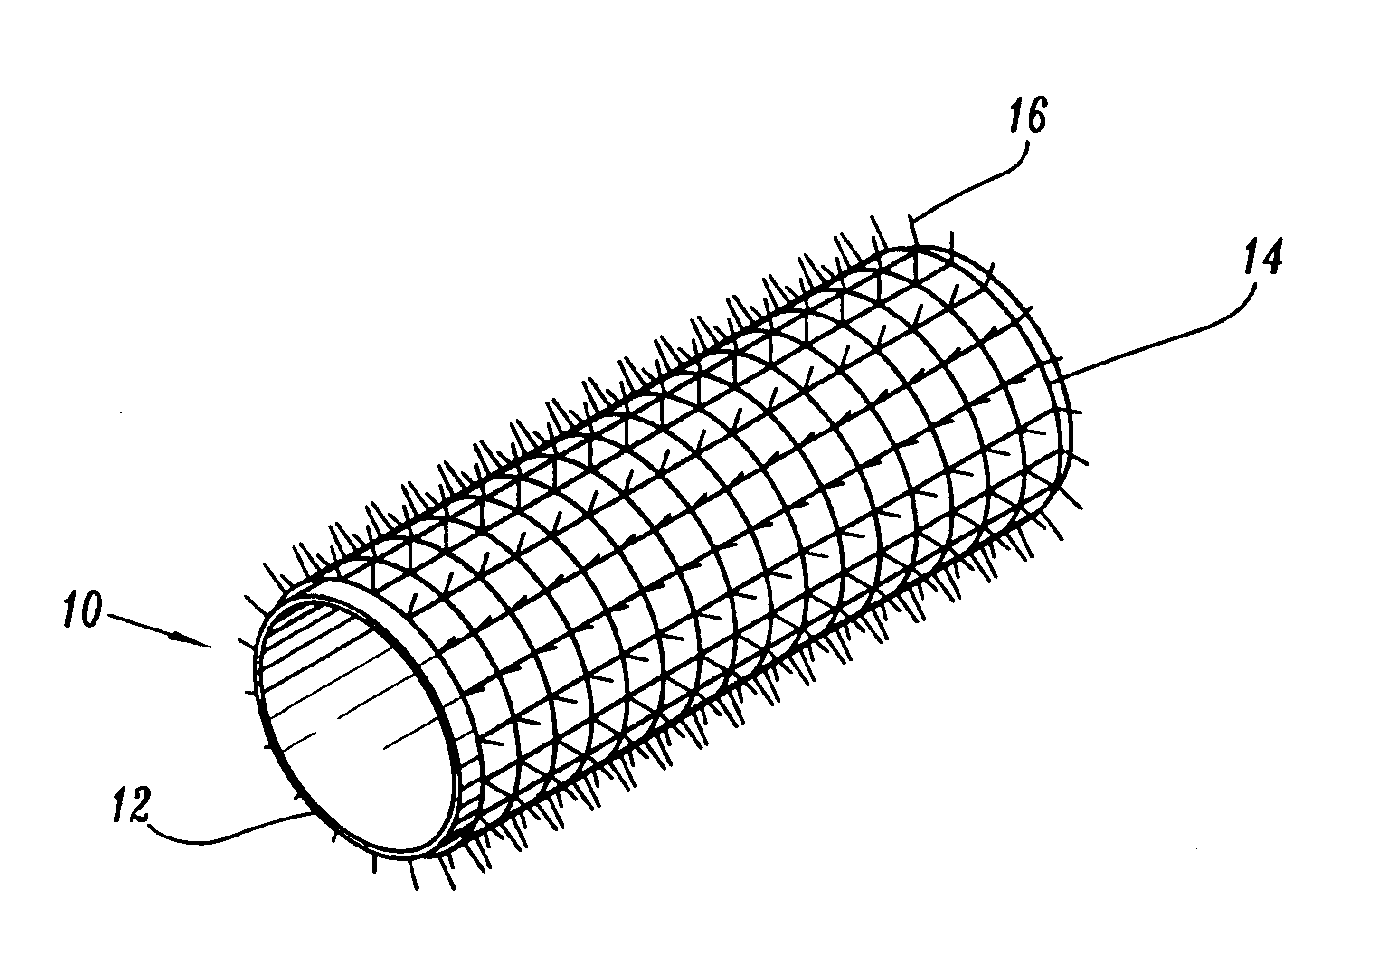 Hair-styling device having ion-emitting ceramic material components